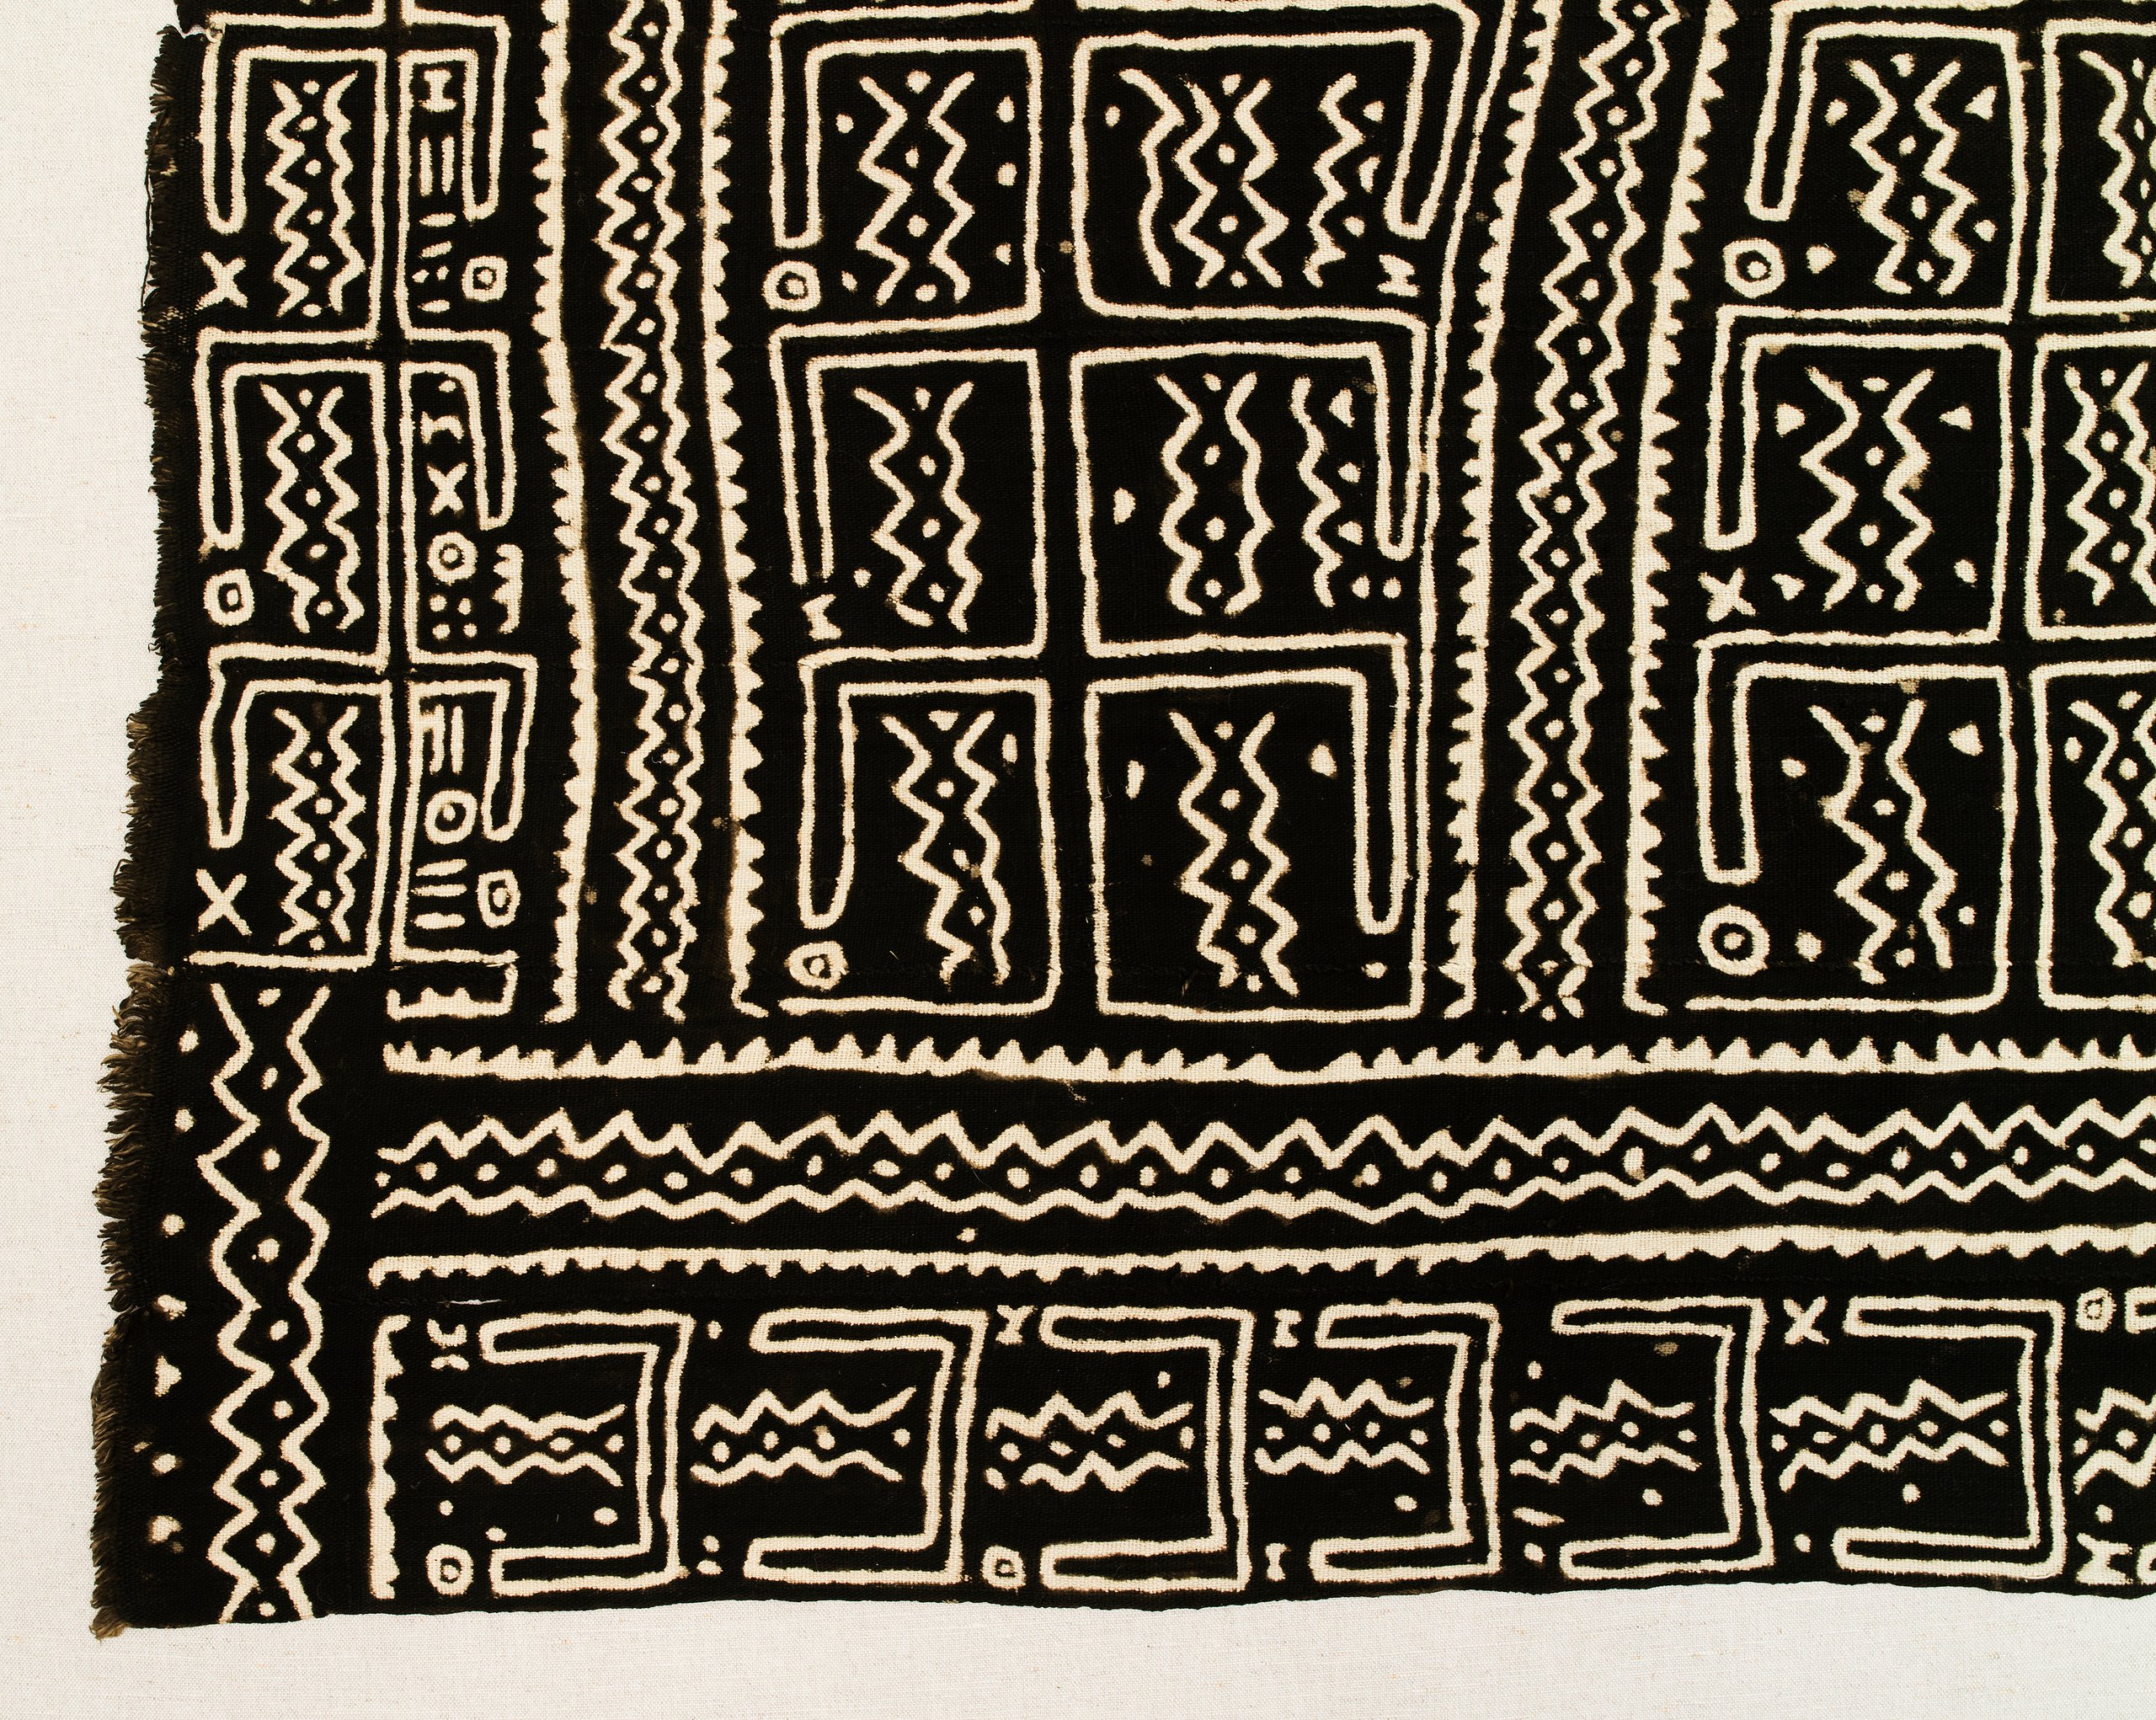 Powerhouse Collection - Bogolanfini or mud cloth from Mali